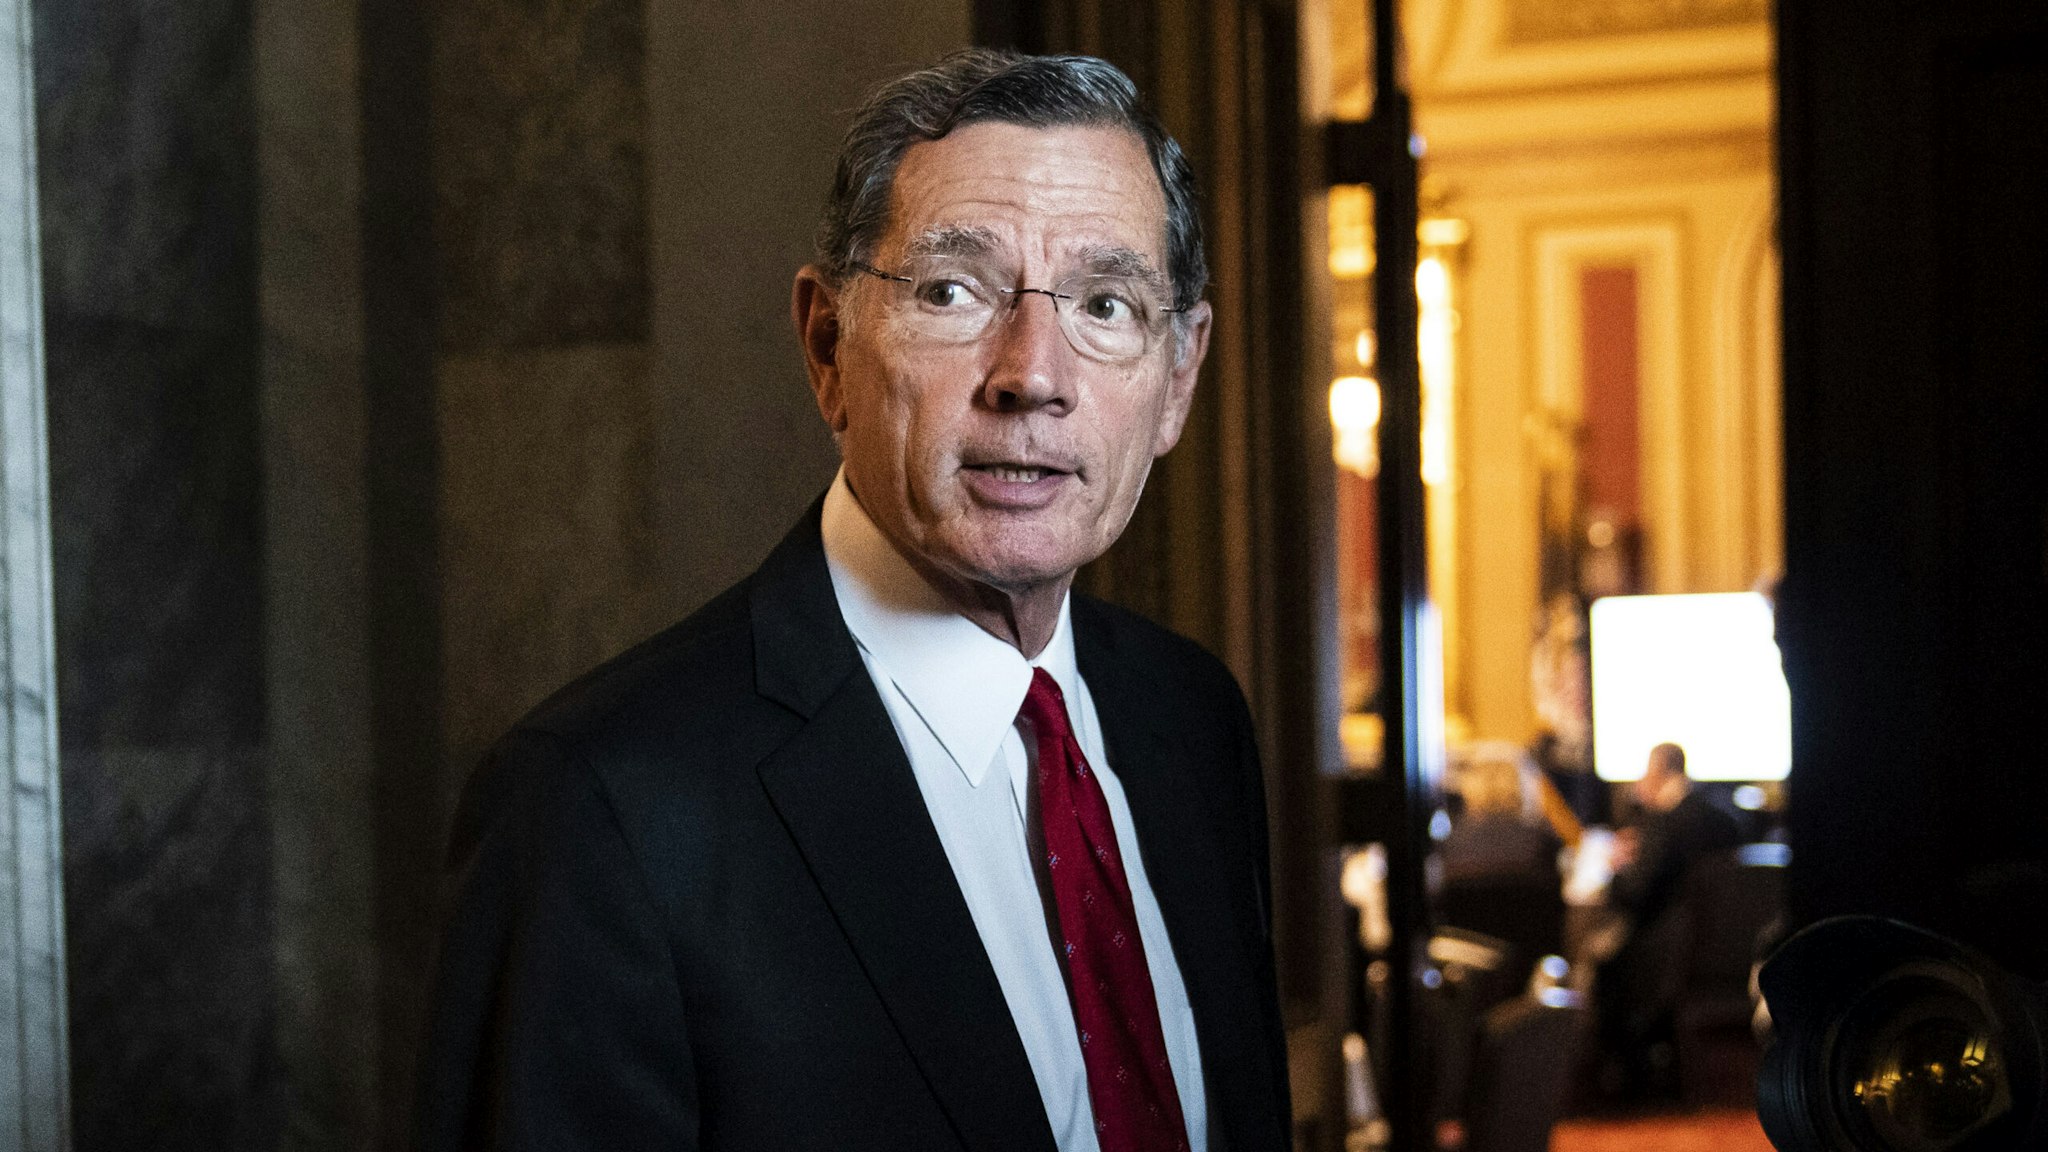 Washington, DC - September 7 : Sen. John Barrasso, R-Wyo., walks to a weekly policy luncheon on Capitol Hill on Wednesday, Sept 07, 2022 in Washington, DC.